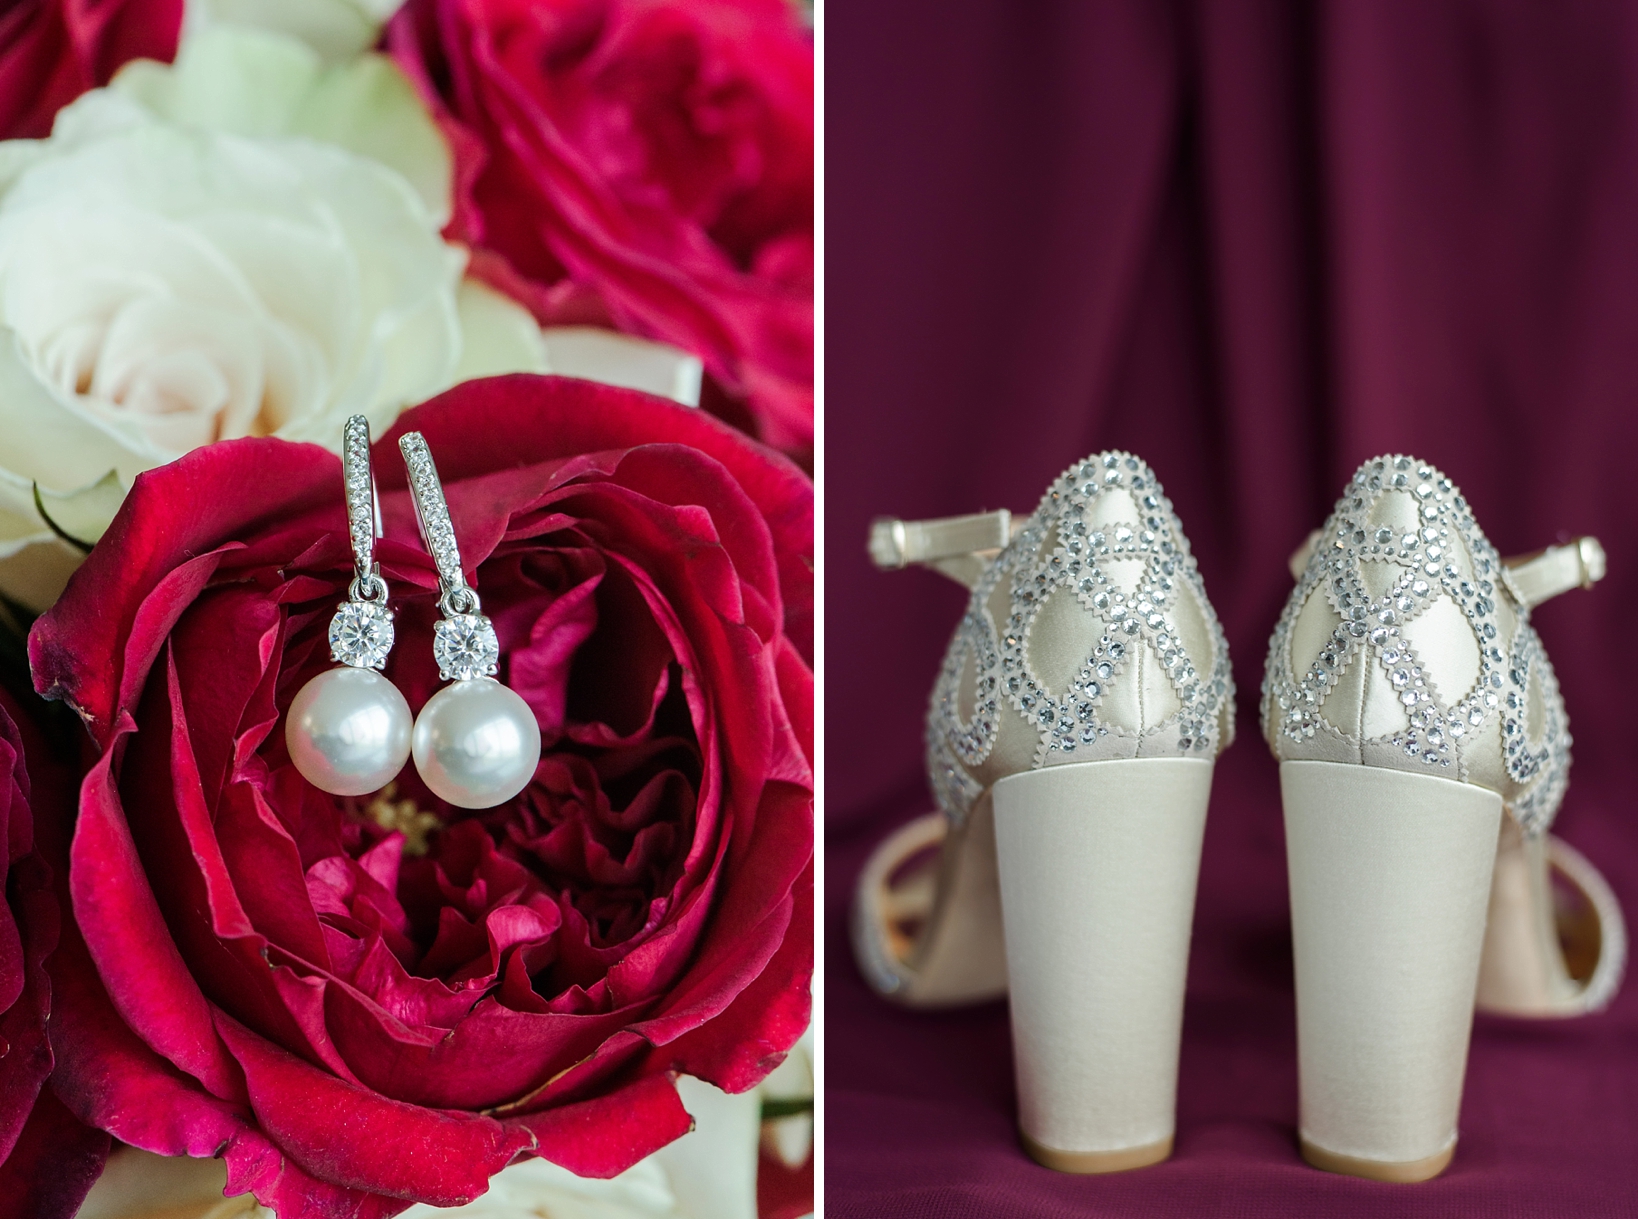 Bride's pearl earrings against a red rose flower bouquet and her wedding shoes against a merlot dress